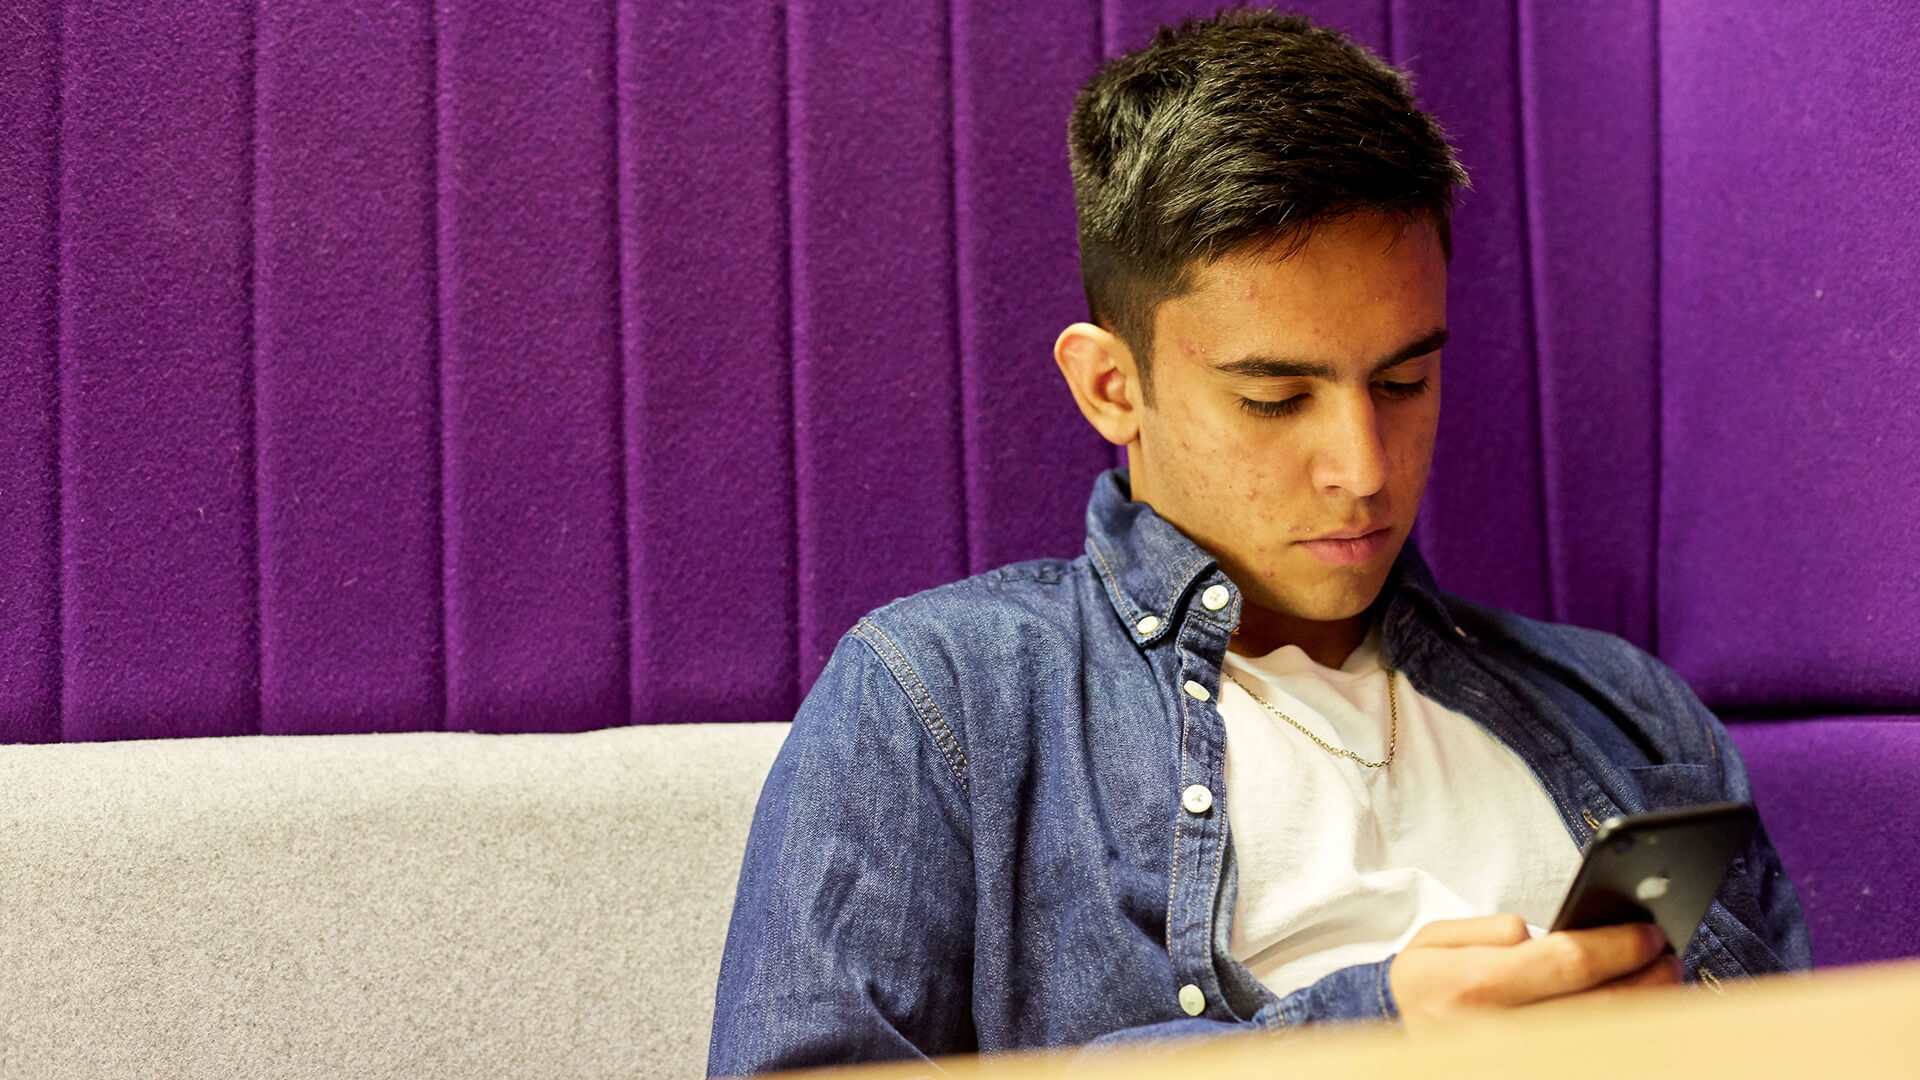 A-young-adult-boy-in-a-blue-denim-shirt-sitting-and-looking-at-his-phone-against-a-purple-wall